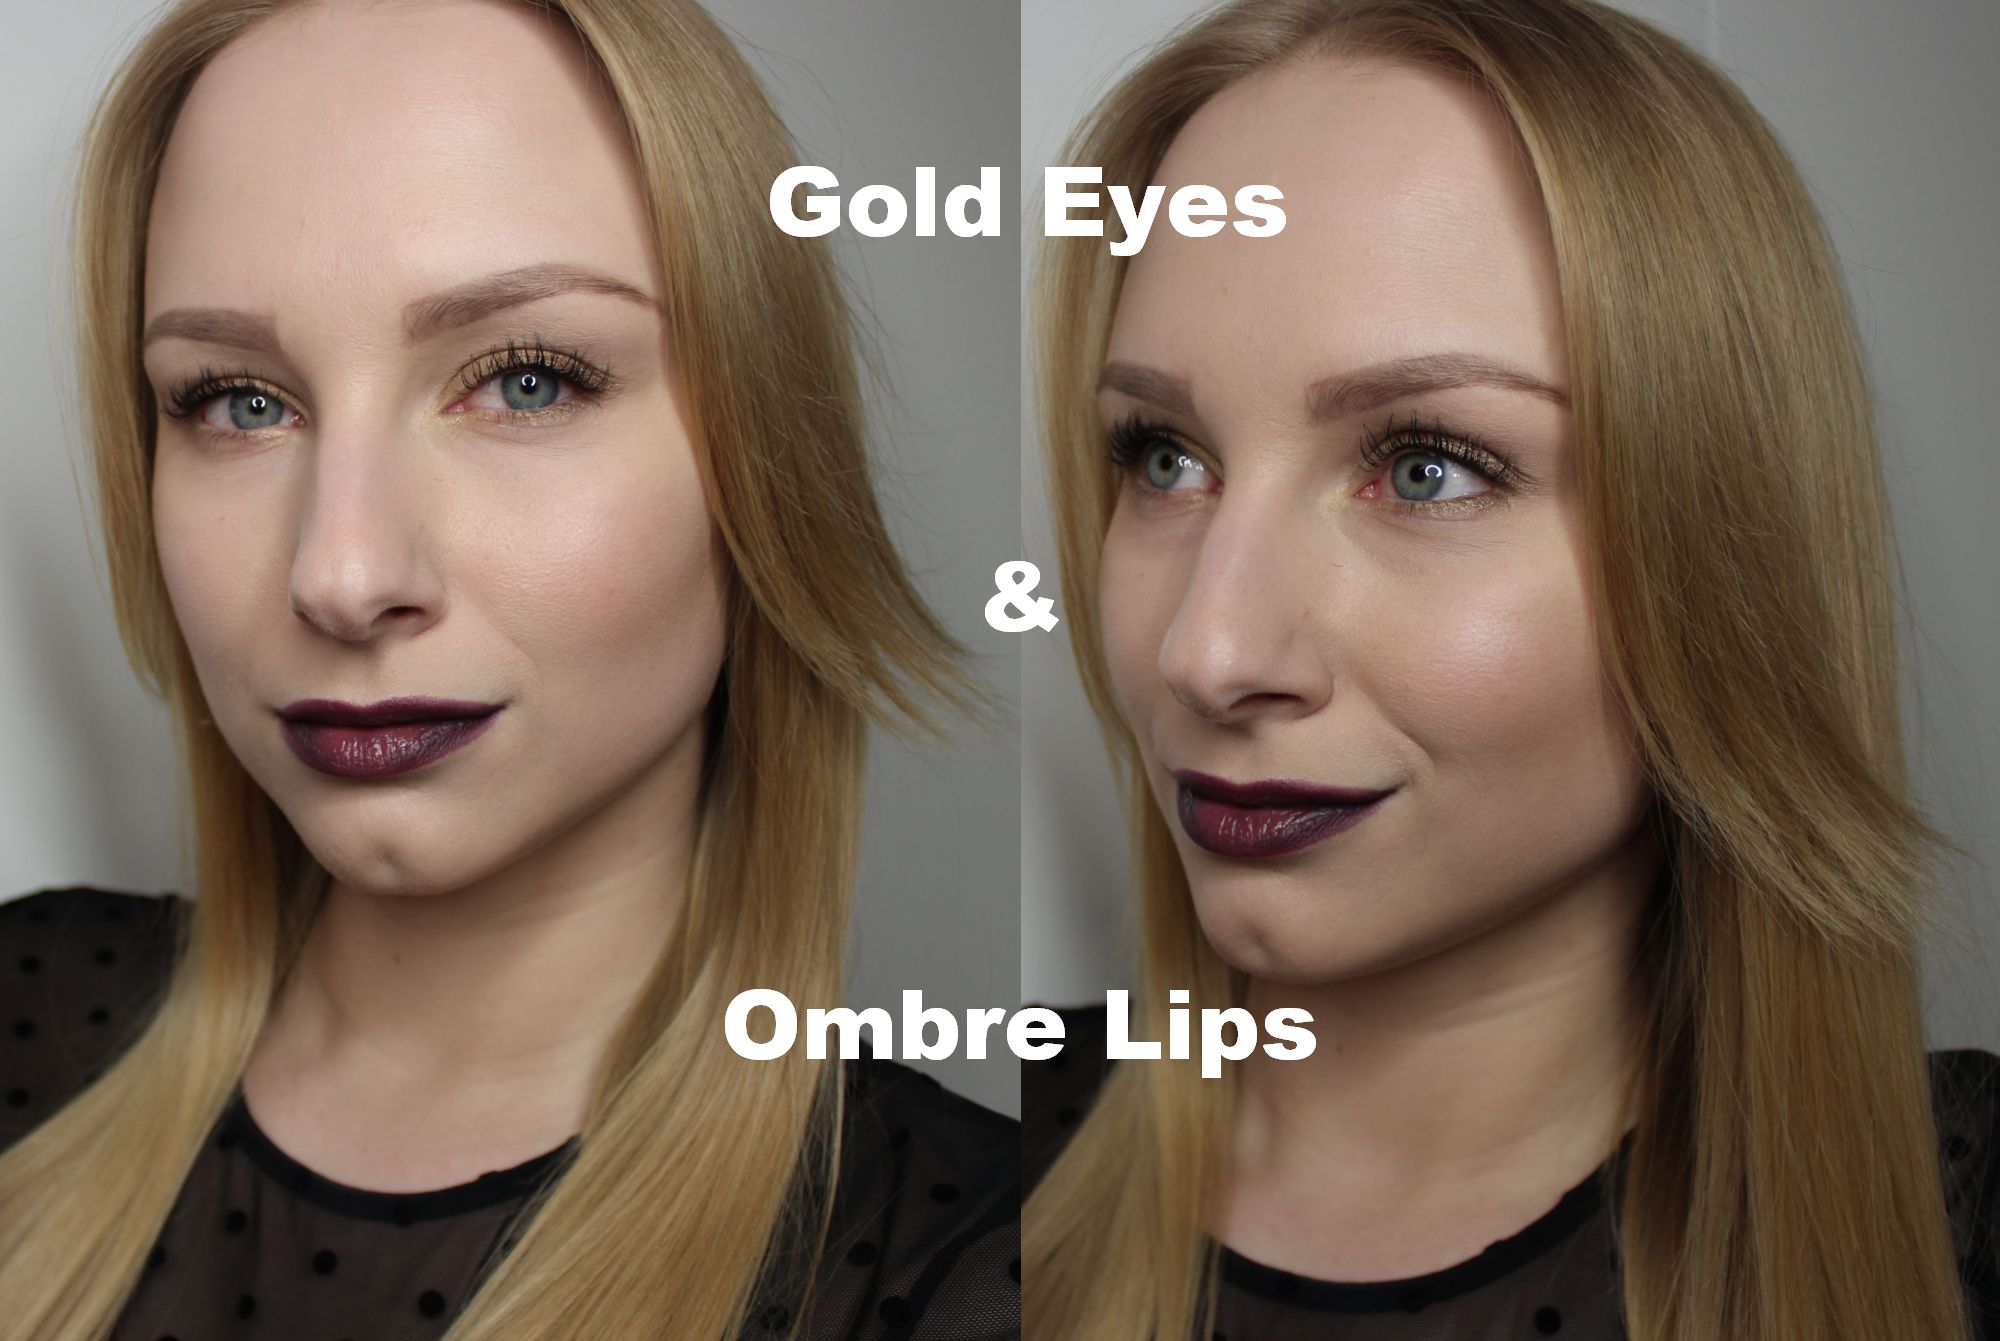 Gold Eyes & Ombre Lips